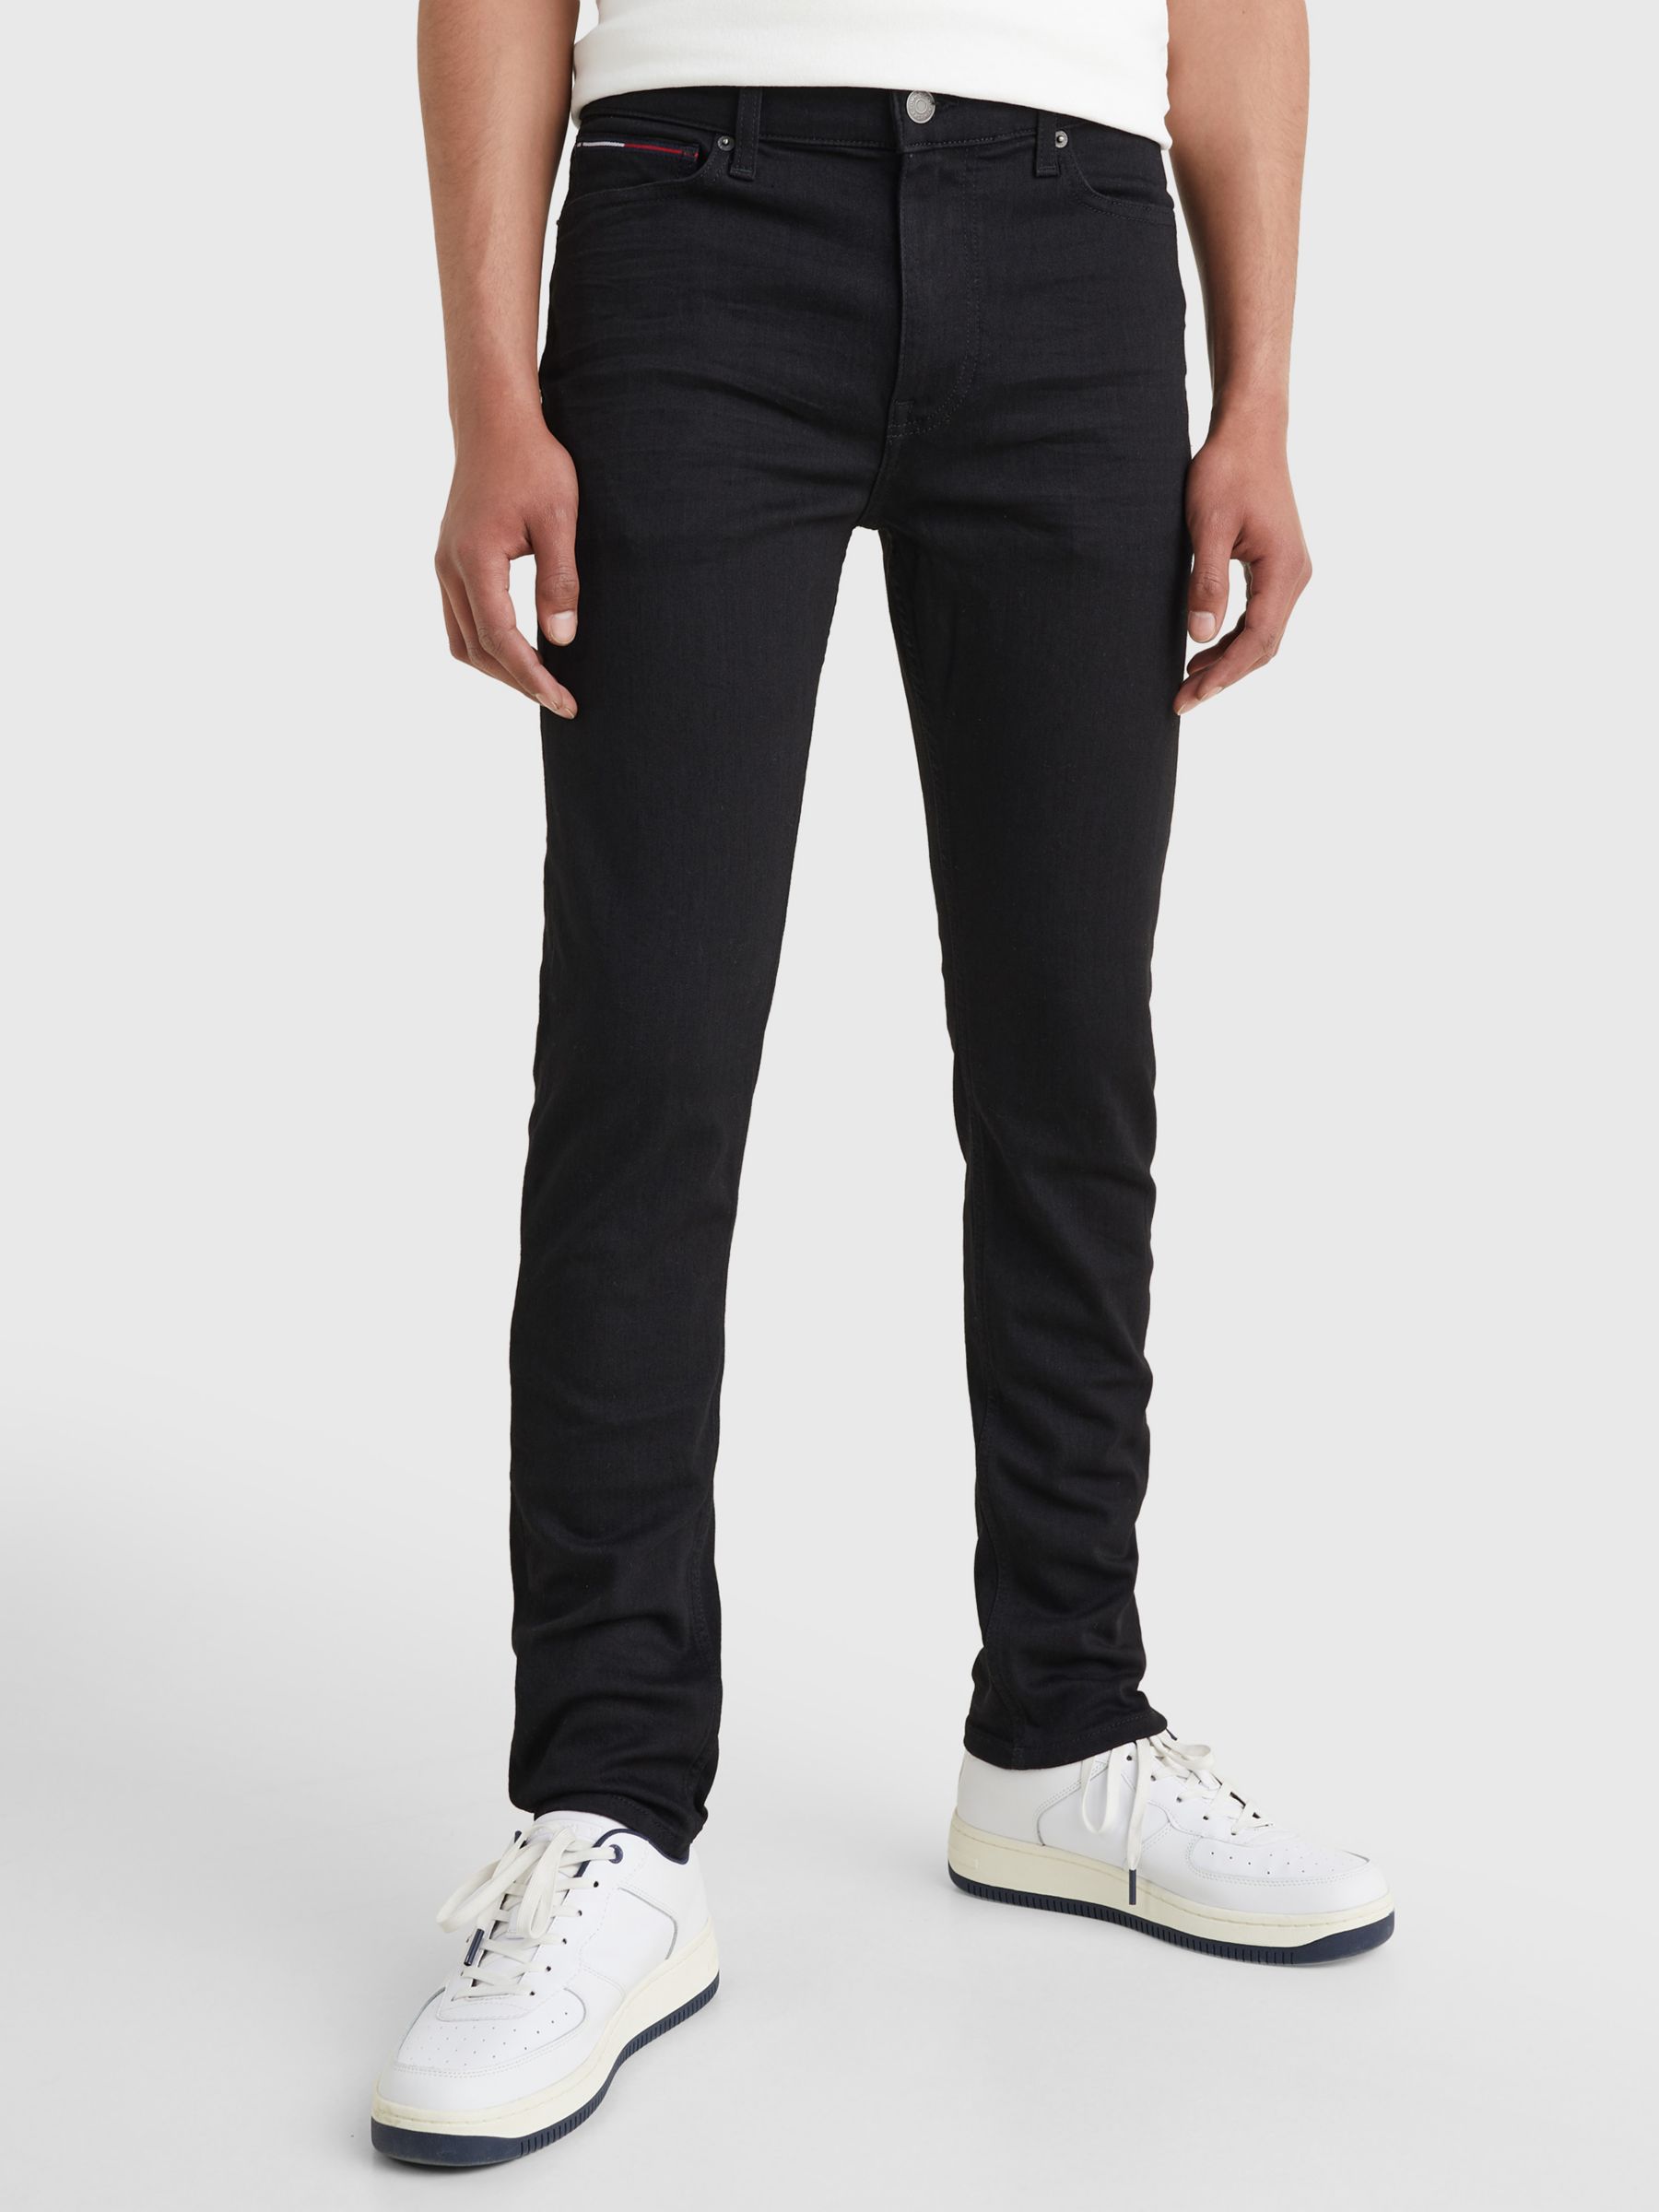 Tommy Jeans Skinny Fit Jeans, New Black Stretch, 30S